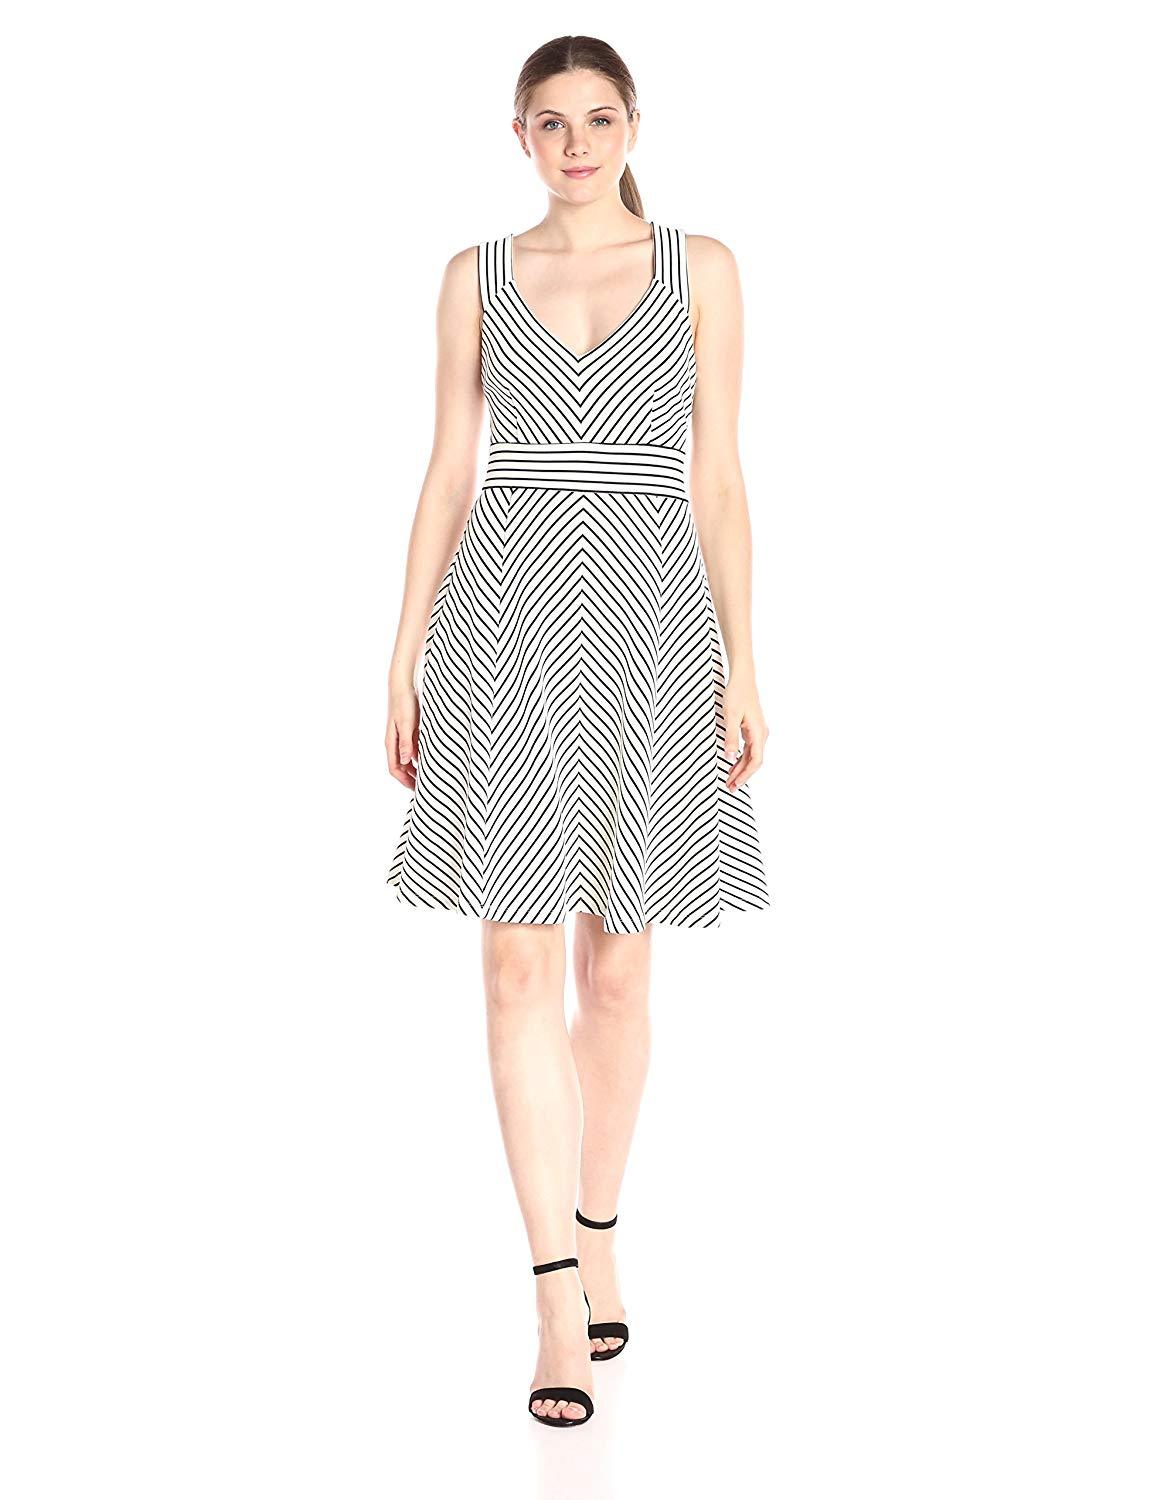 Adrianna Papell - 12255150 Sleeveless Striped Ottoman Knit Sundress In White and Black